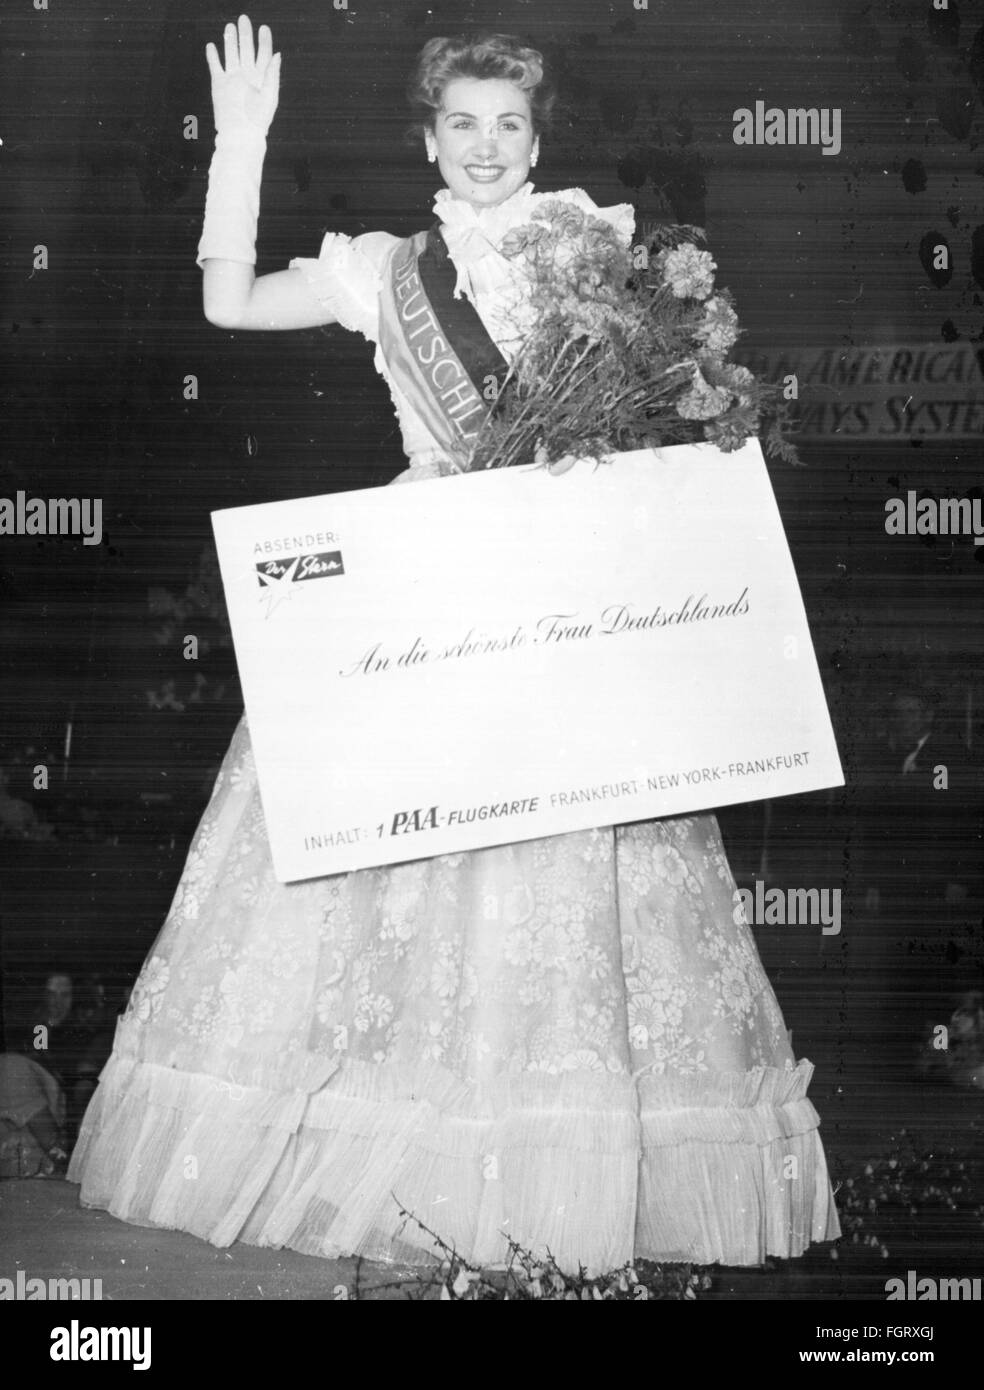 people,women,beauty pageants,Miss Germany 1952,winner Renate Hoy,full length,Kurhaus,Baden-Baden,10.5.1952,20th century,1950s,50s,Germany,Baden - Baden,beauty contest,beauty contests,beauty queen,beauty queens,beauty,beauties,belle,belles,sitting,sit,clothes,outfit,outfits,evening dress,evening dresses,evening gown,sash,sashes,smiles,smiling,smile,birth name: Anita Huy,actress,flower,flower bouquet,bunch of flowers,bouquets,evening gloves,evening glove,opera gloves,opera glove,waving,beckon,beckoning,honor,honour,Additional-Rights-Clearences-Not Available Stock Photo